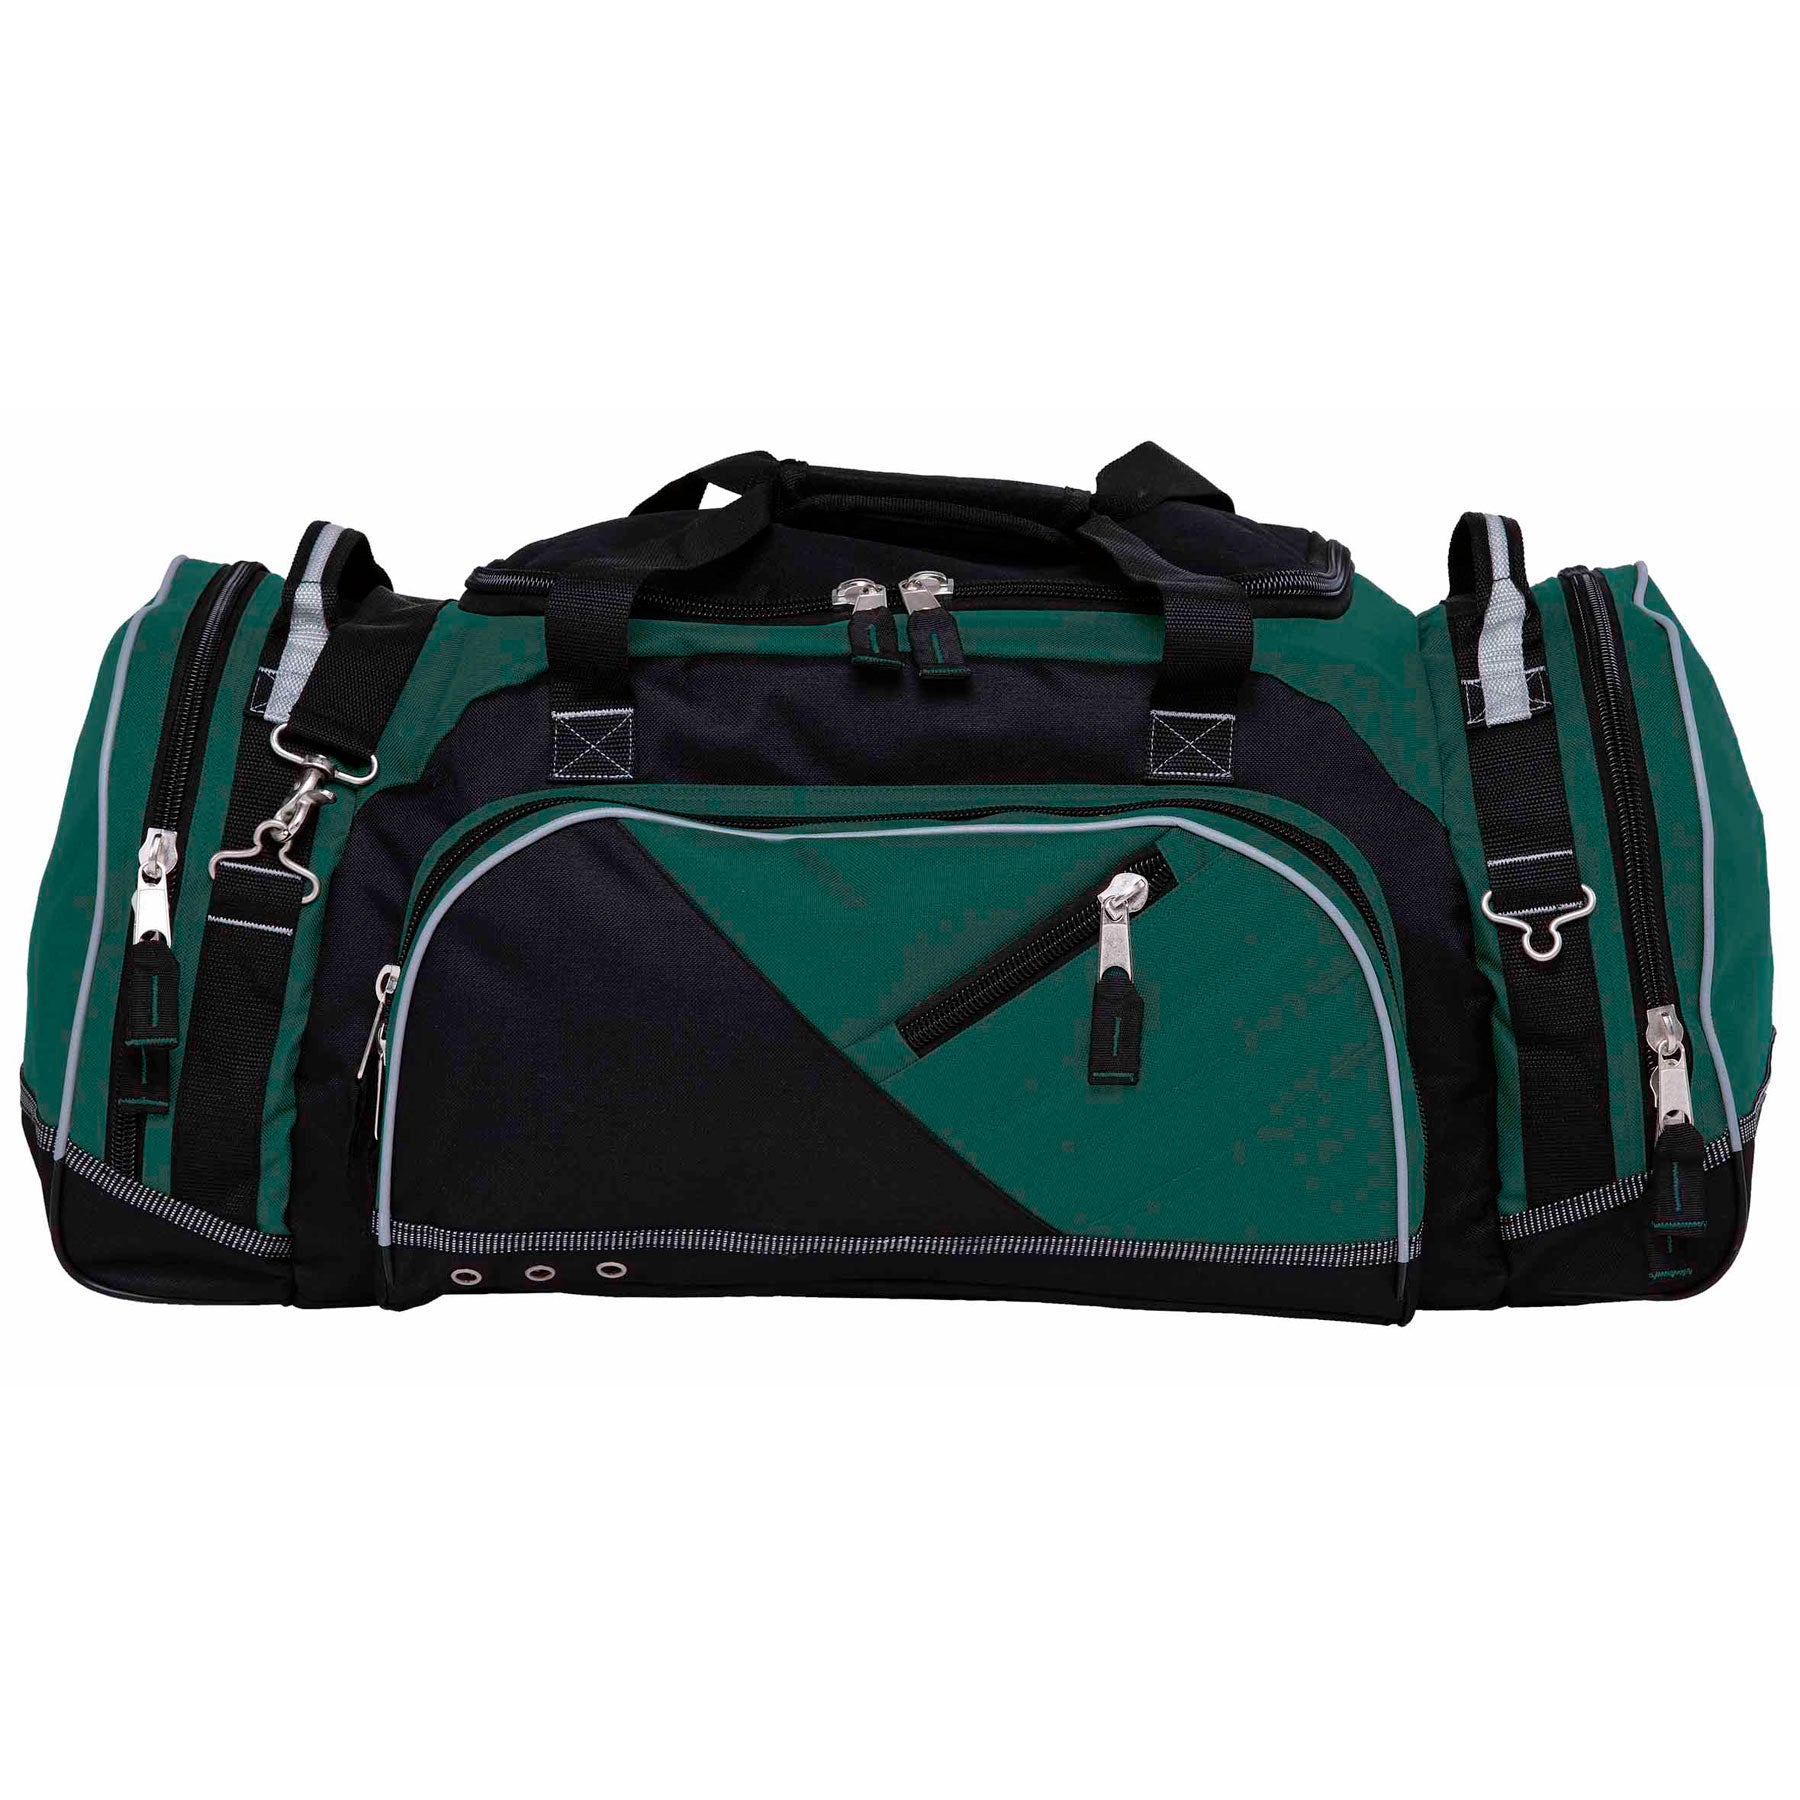 House of Uniforms The Recon Sports Duffle Bag Gear for Life Green/Black